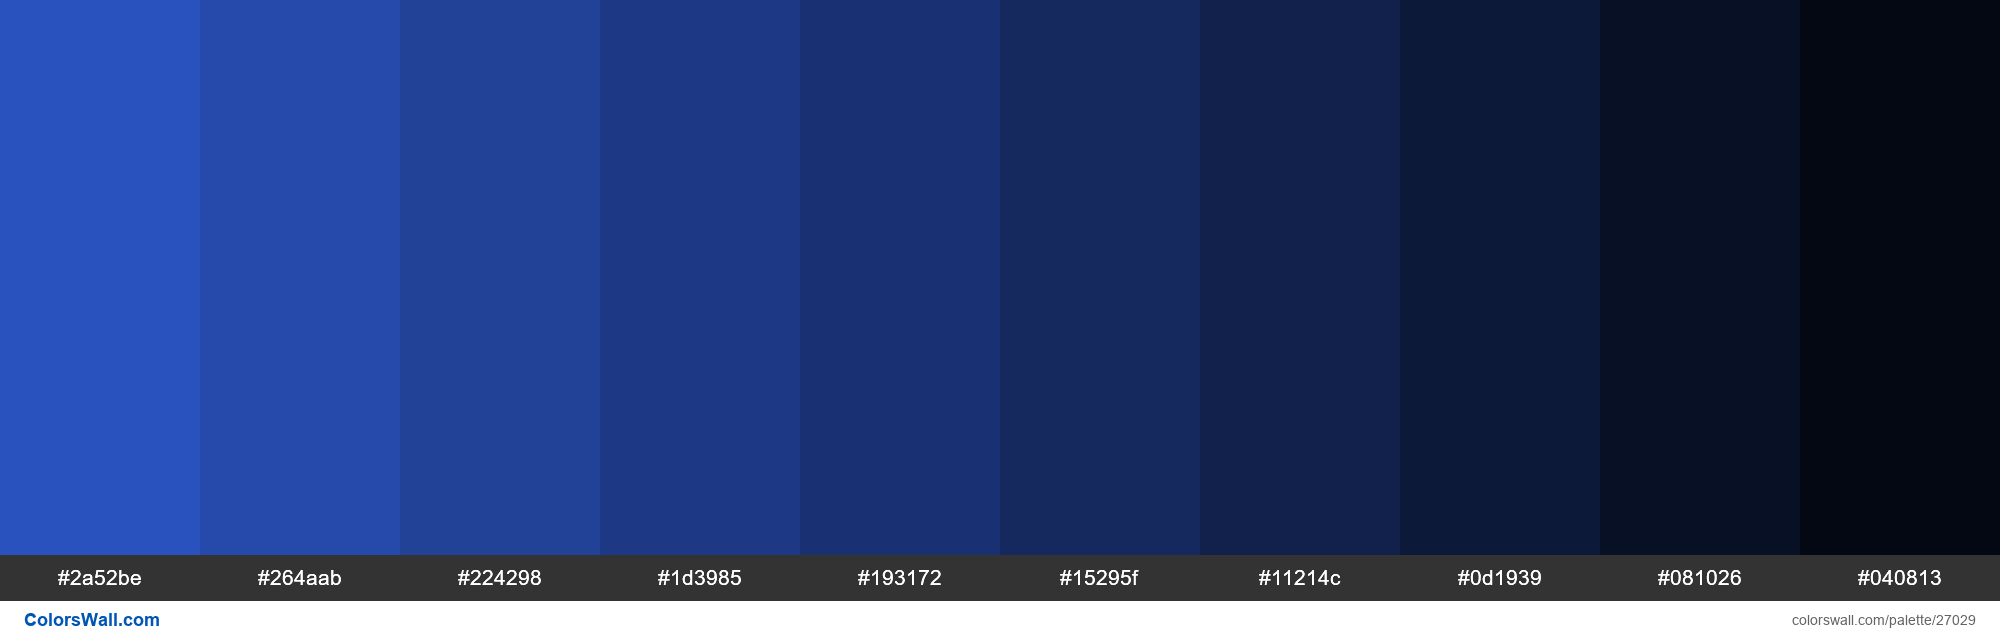 colorswall on X: Shades of Cerulean Blue color #2A52BE hex #2a52be,  #264aab, #224298, #1d3985, #193172, #15295f, #11214c, #0d1939, #081026,  #040813 #colors #palette   /  X